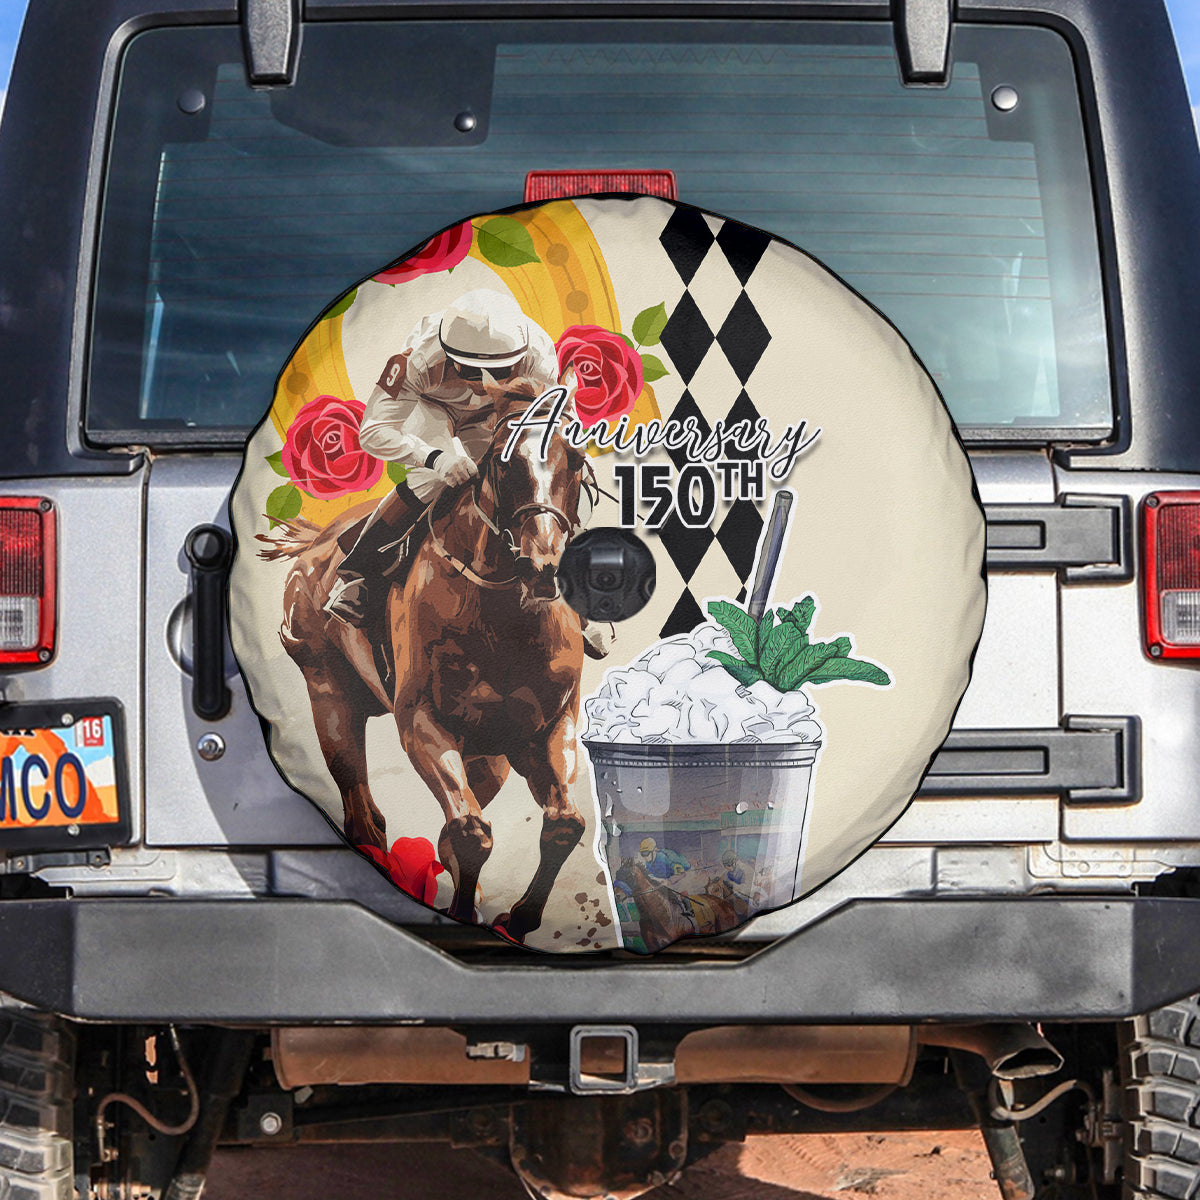 Kentucky Horse Racing 150th Anniversary Spare Tire Cover Mint Julep and Horseshoe Roses